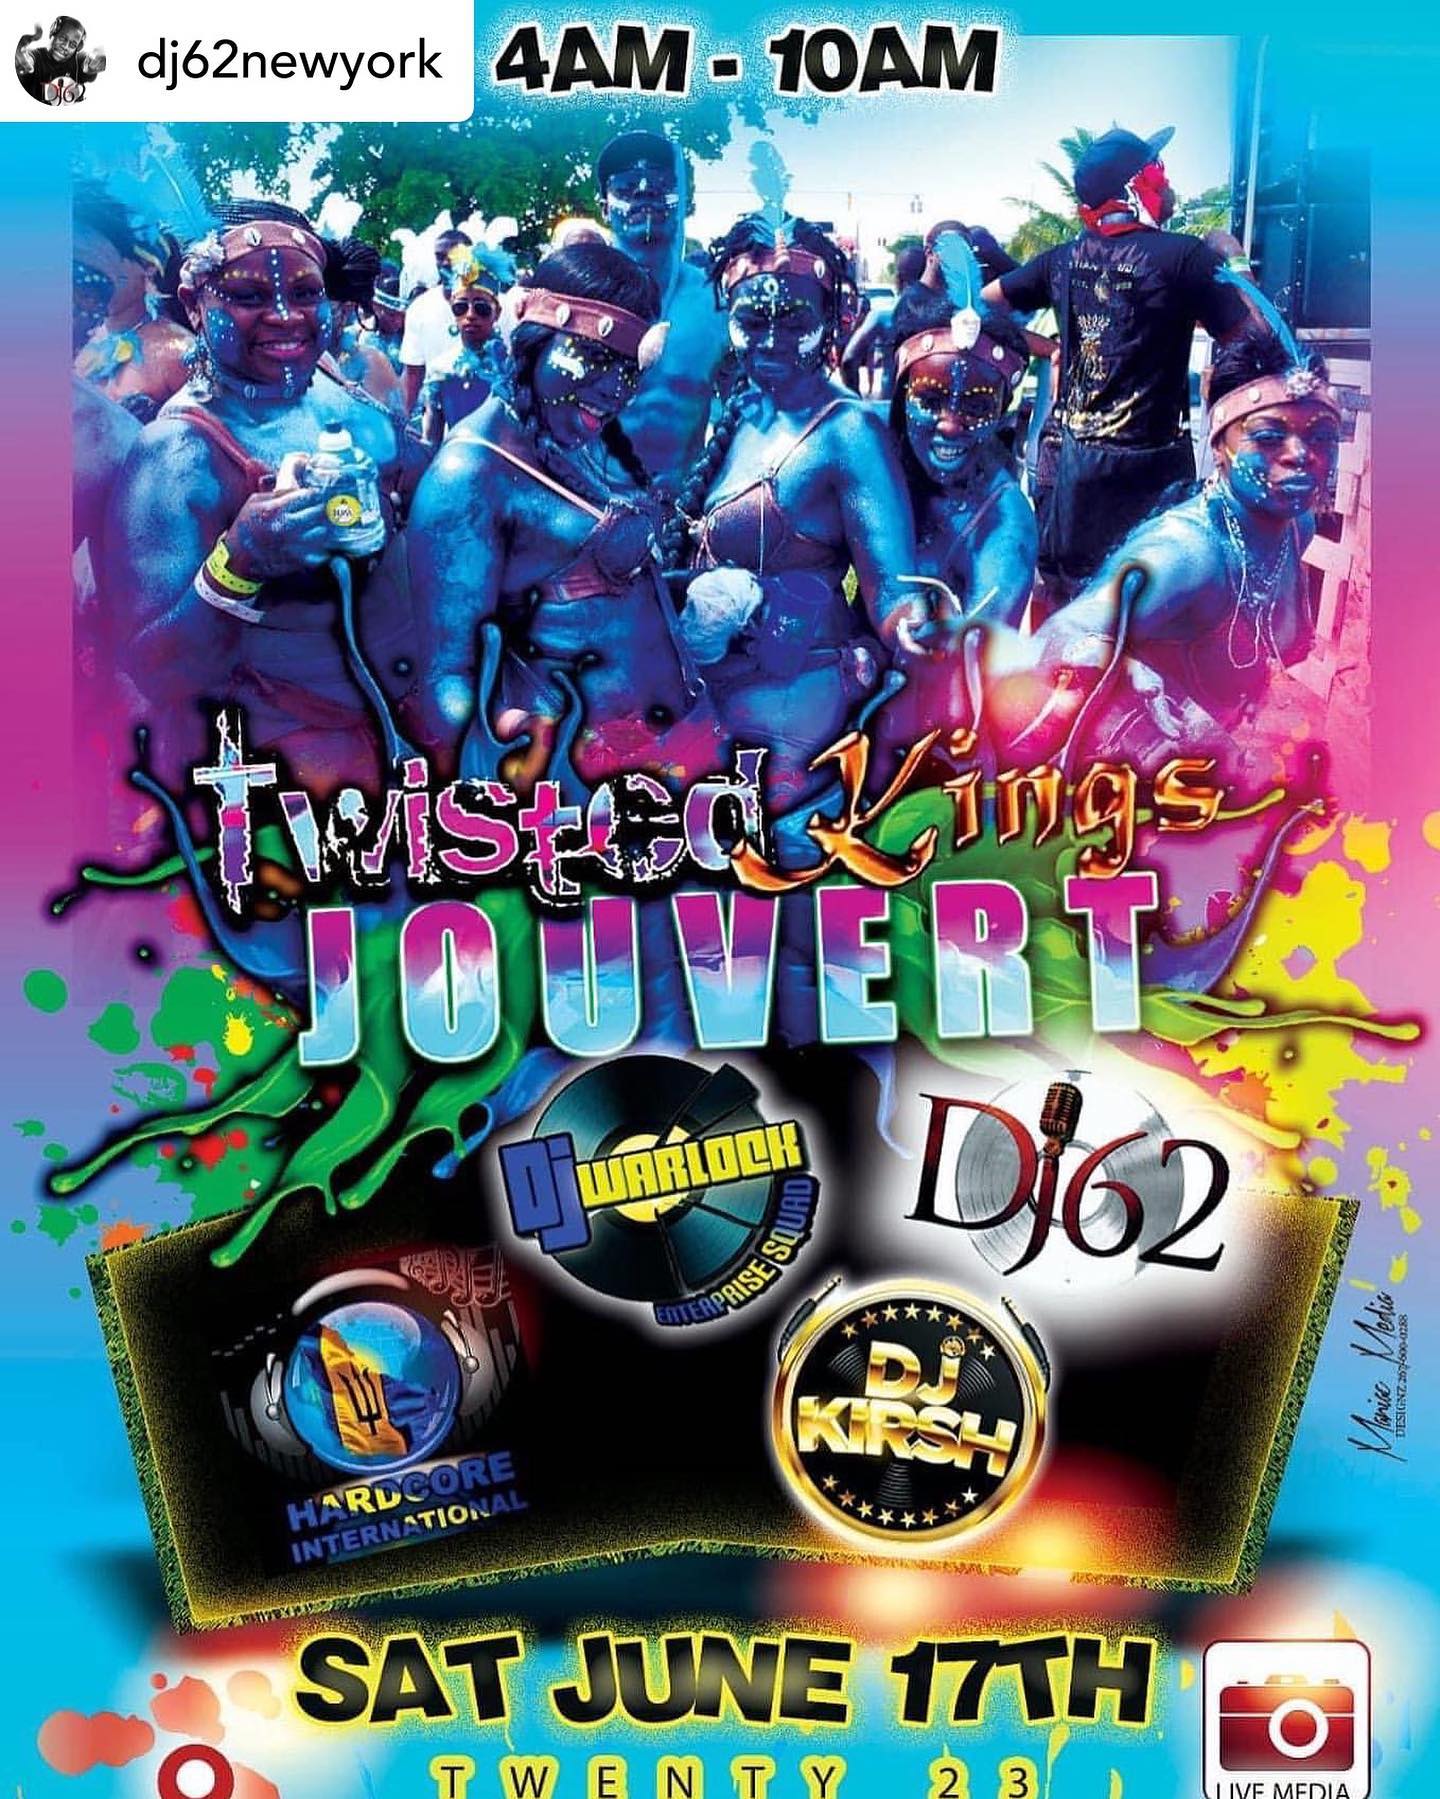 Philly Get Ready - Twisted Kings Jouvert 
Philly Carnival .

4am to 10am